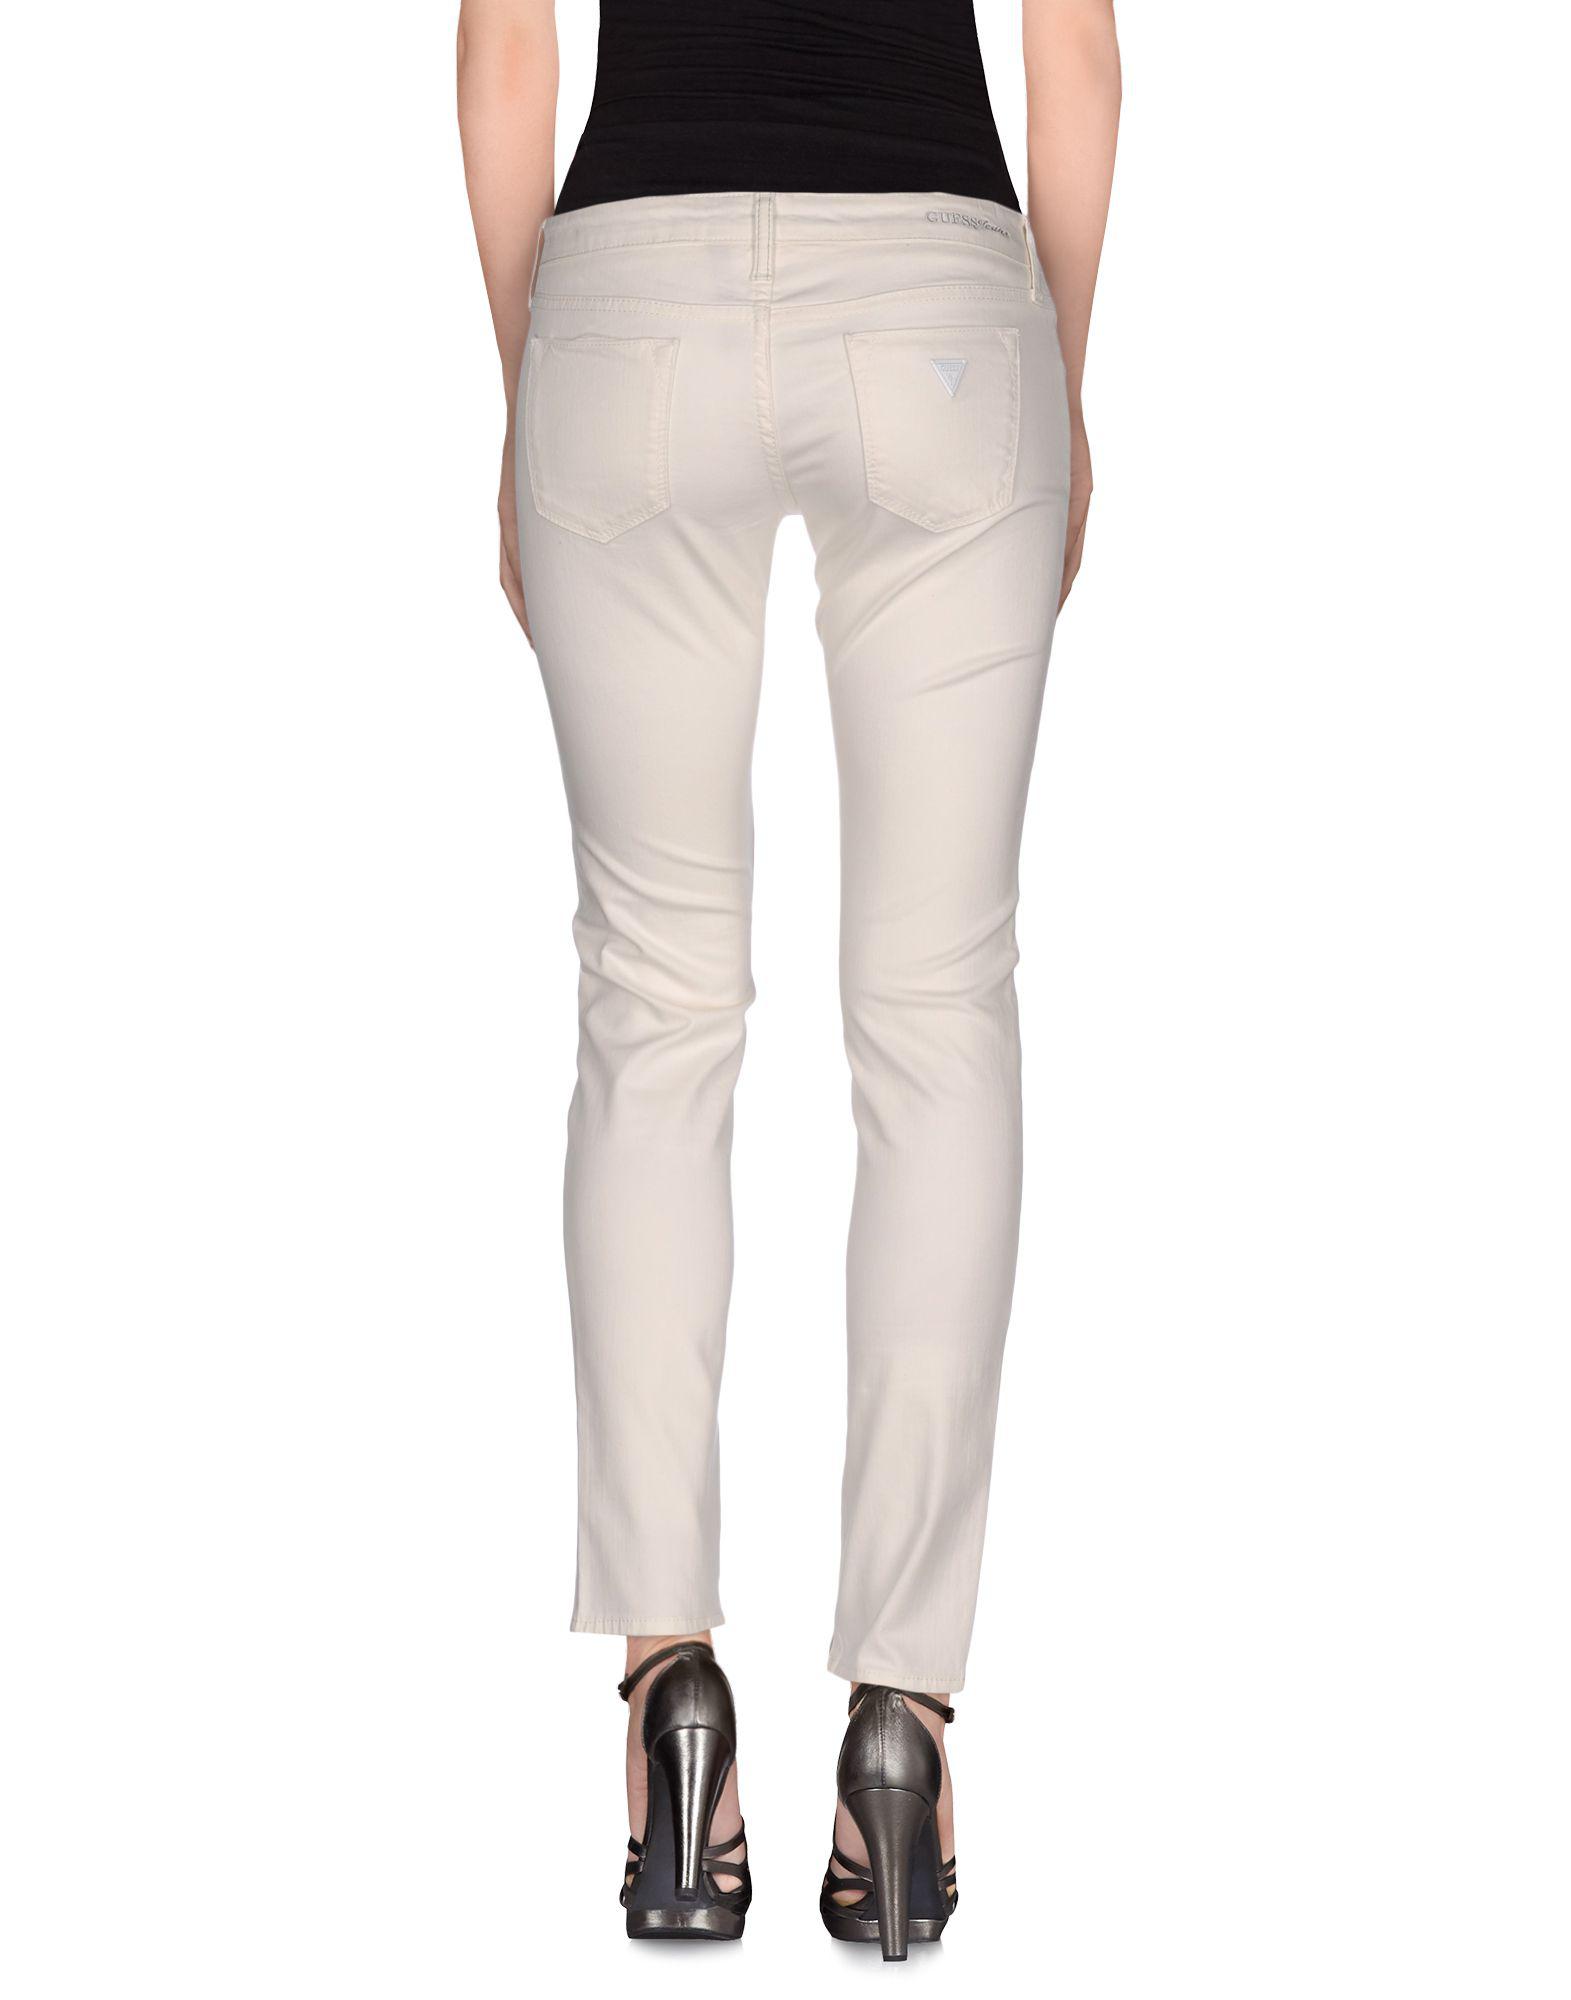 Guess Denim Trousers in White - Lyst